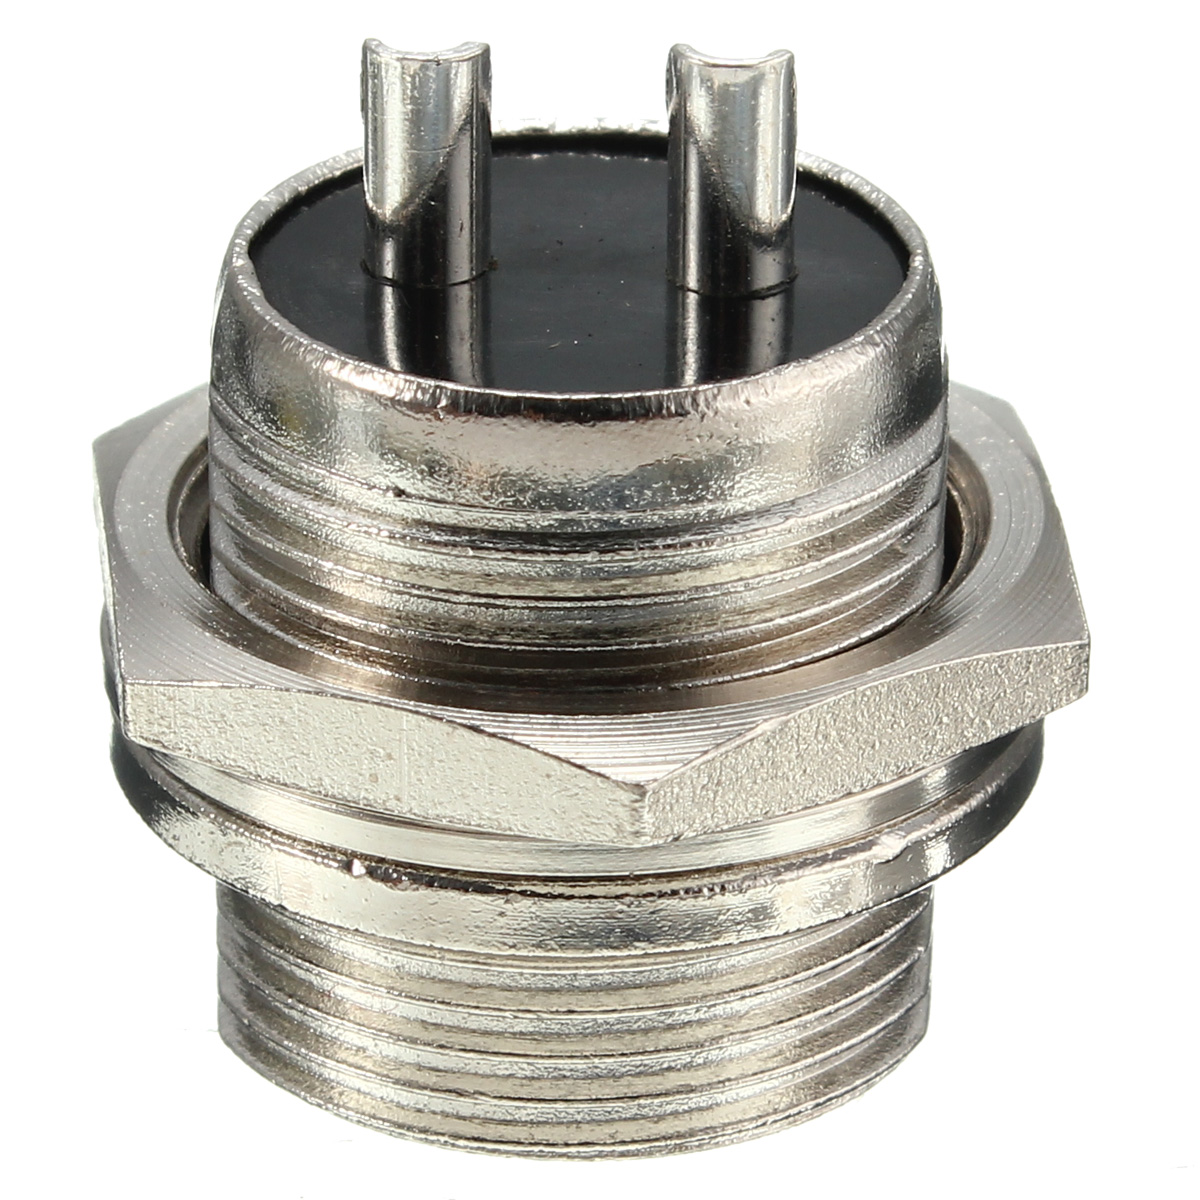 M16-2345678-Pin-Screw-Type-Electrical-Aviation-Plug-Socket-Connector-Aviation-Connector-Plug-1333374-6